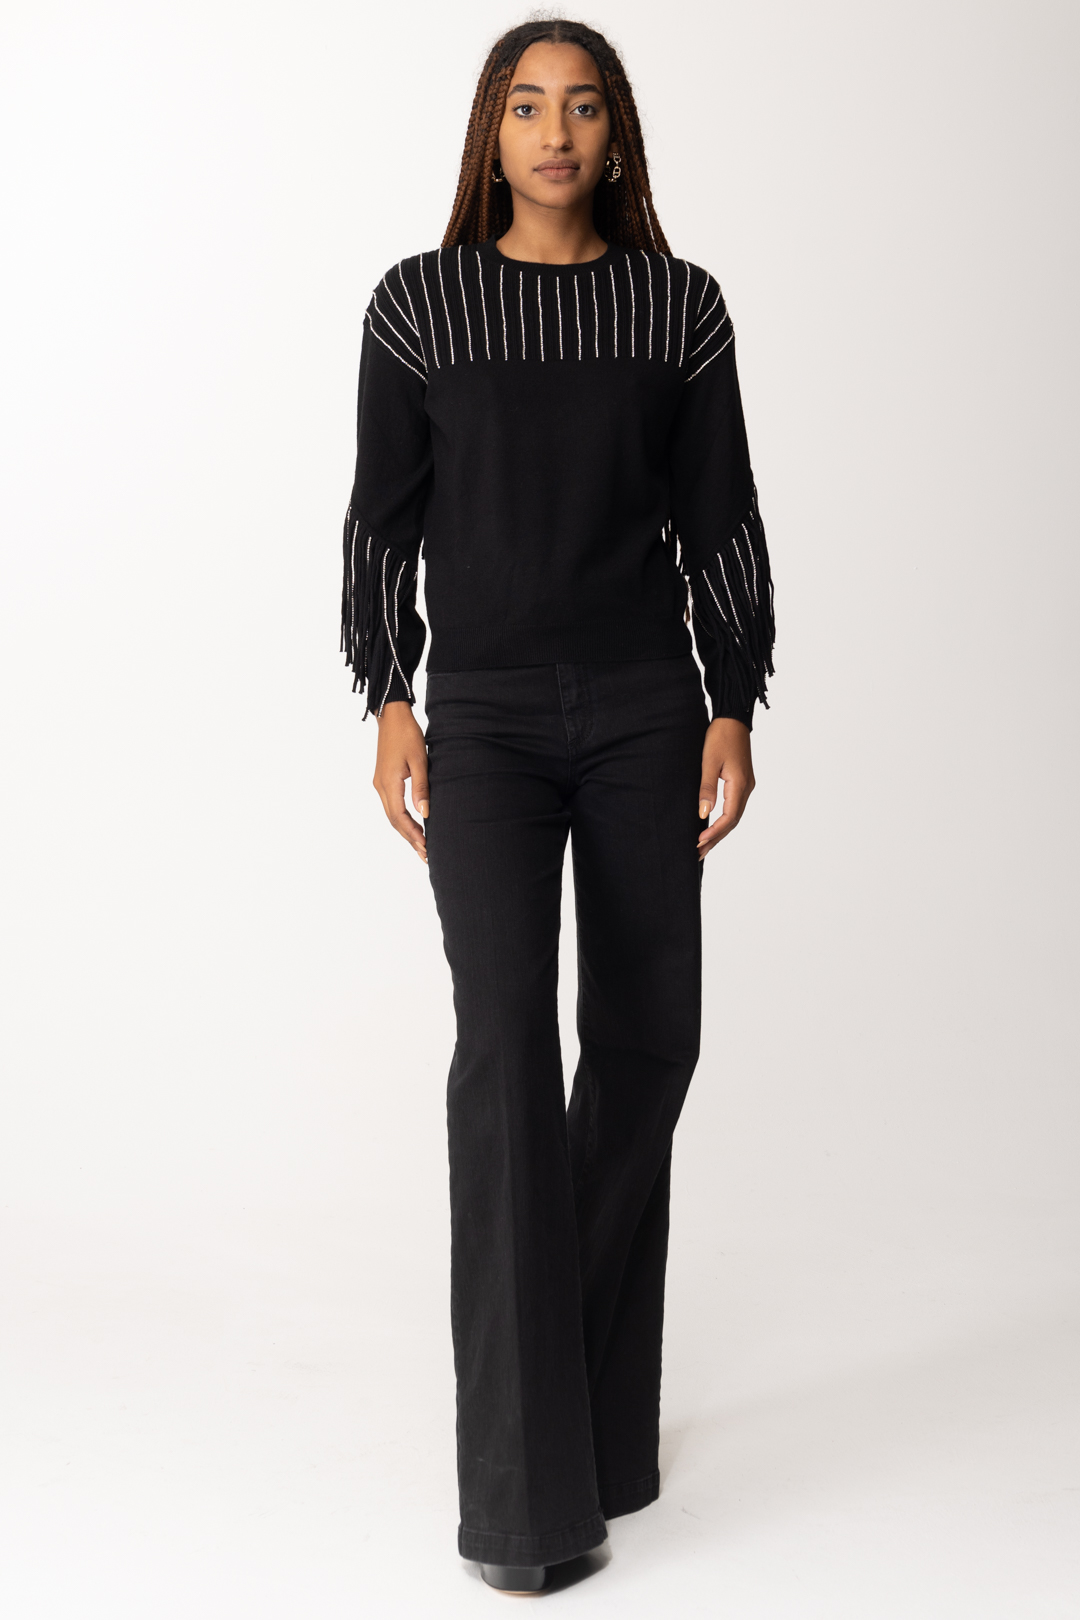 Preview: Pinko Pullover with Fringes and Rhinestones NERO LIMOUSINE